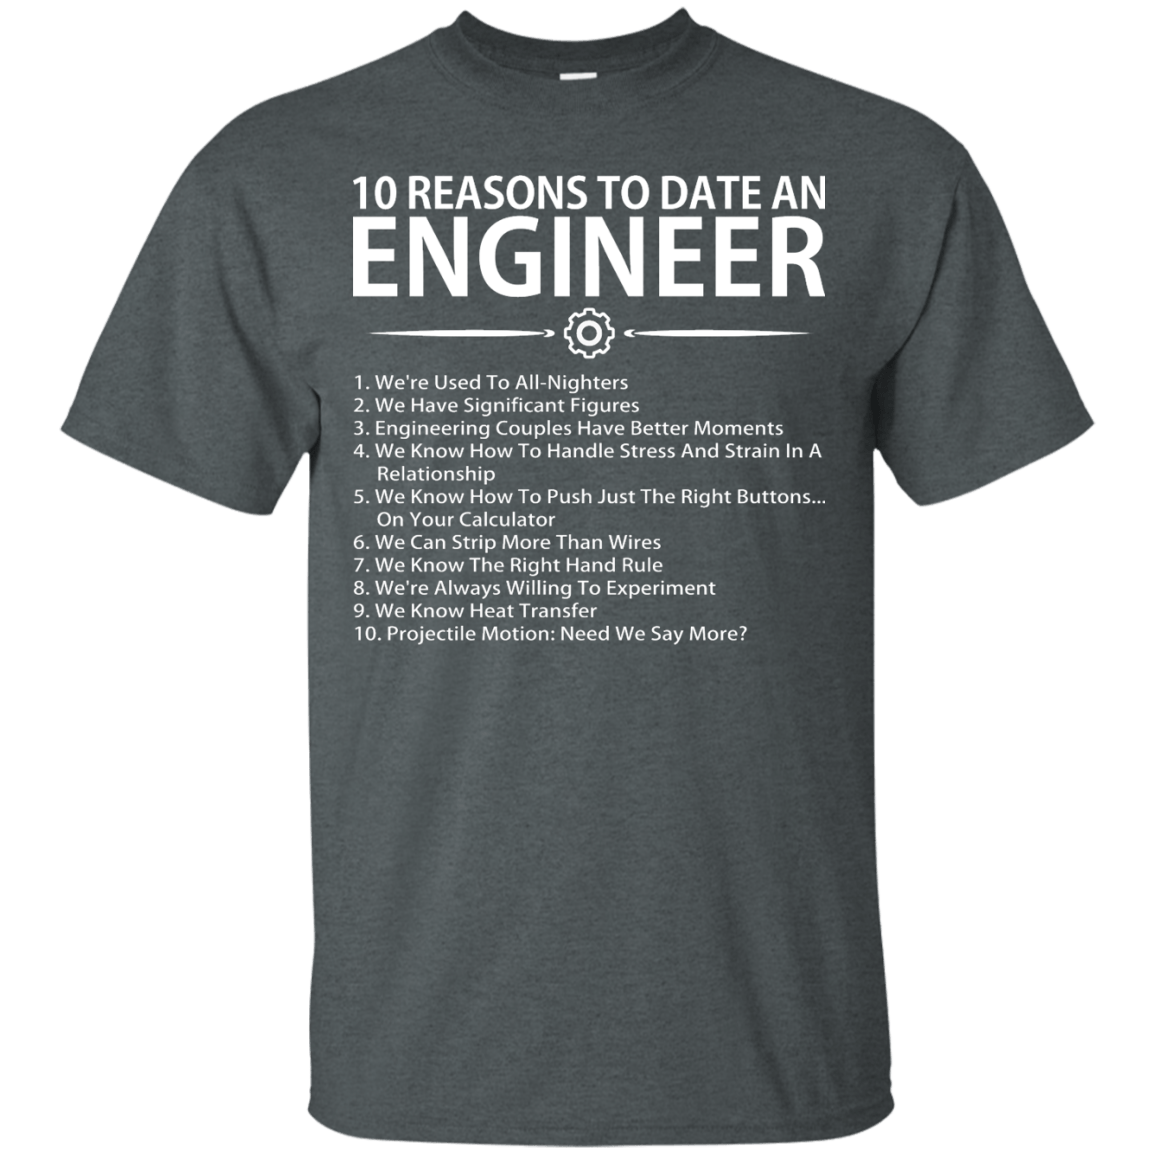 reasons for dating an engineer